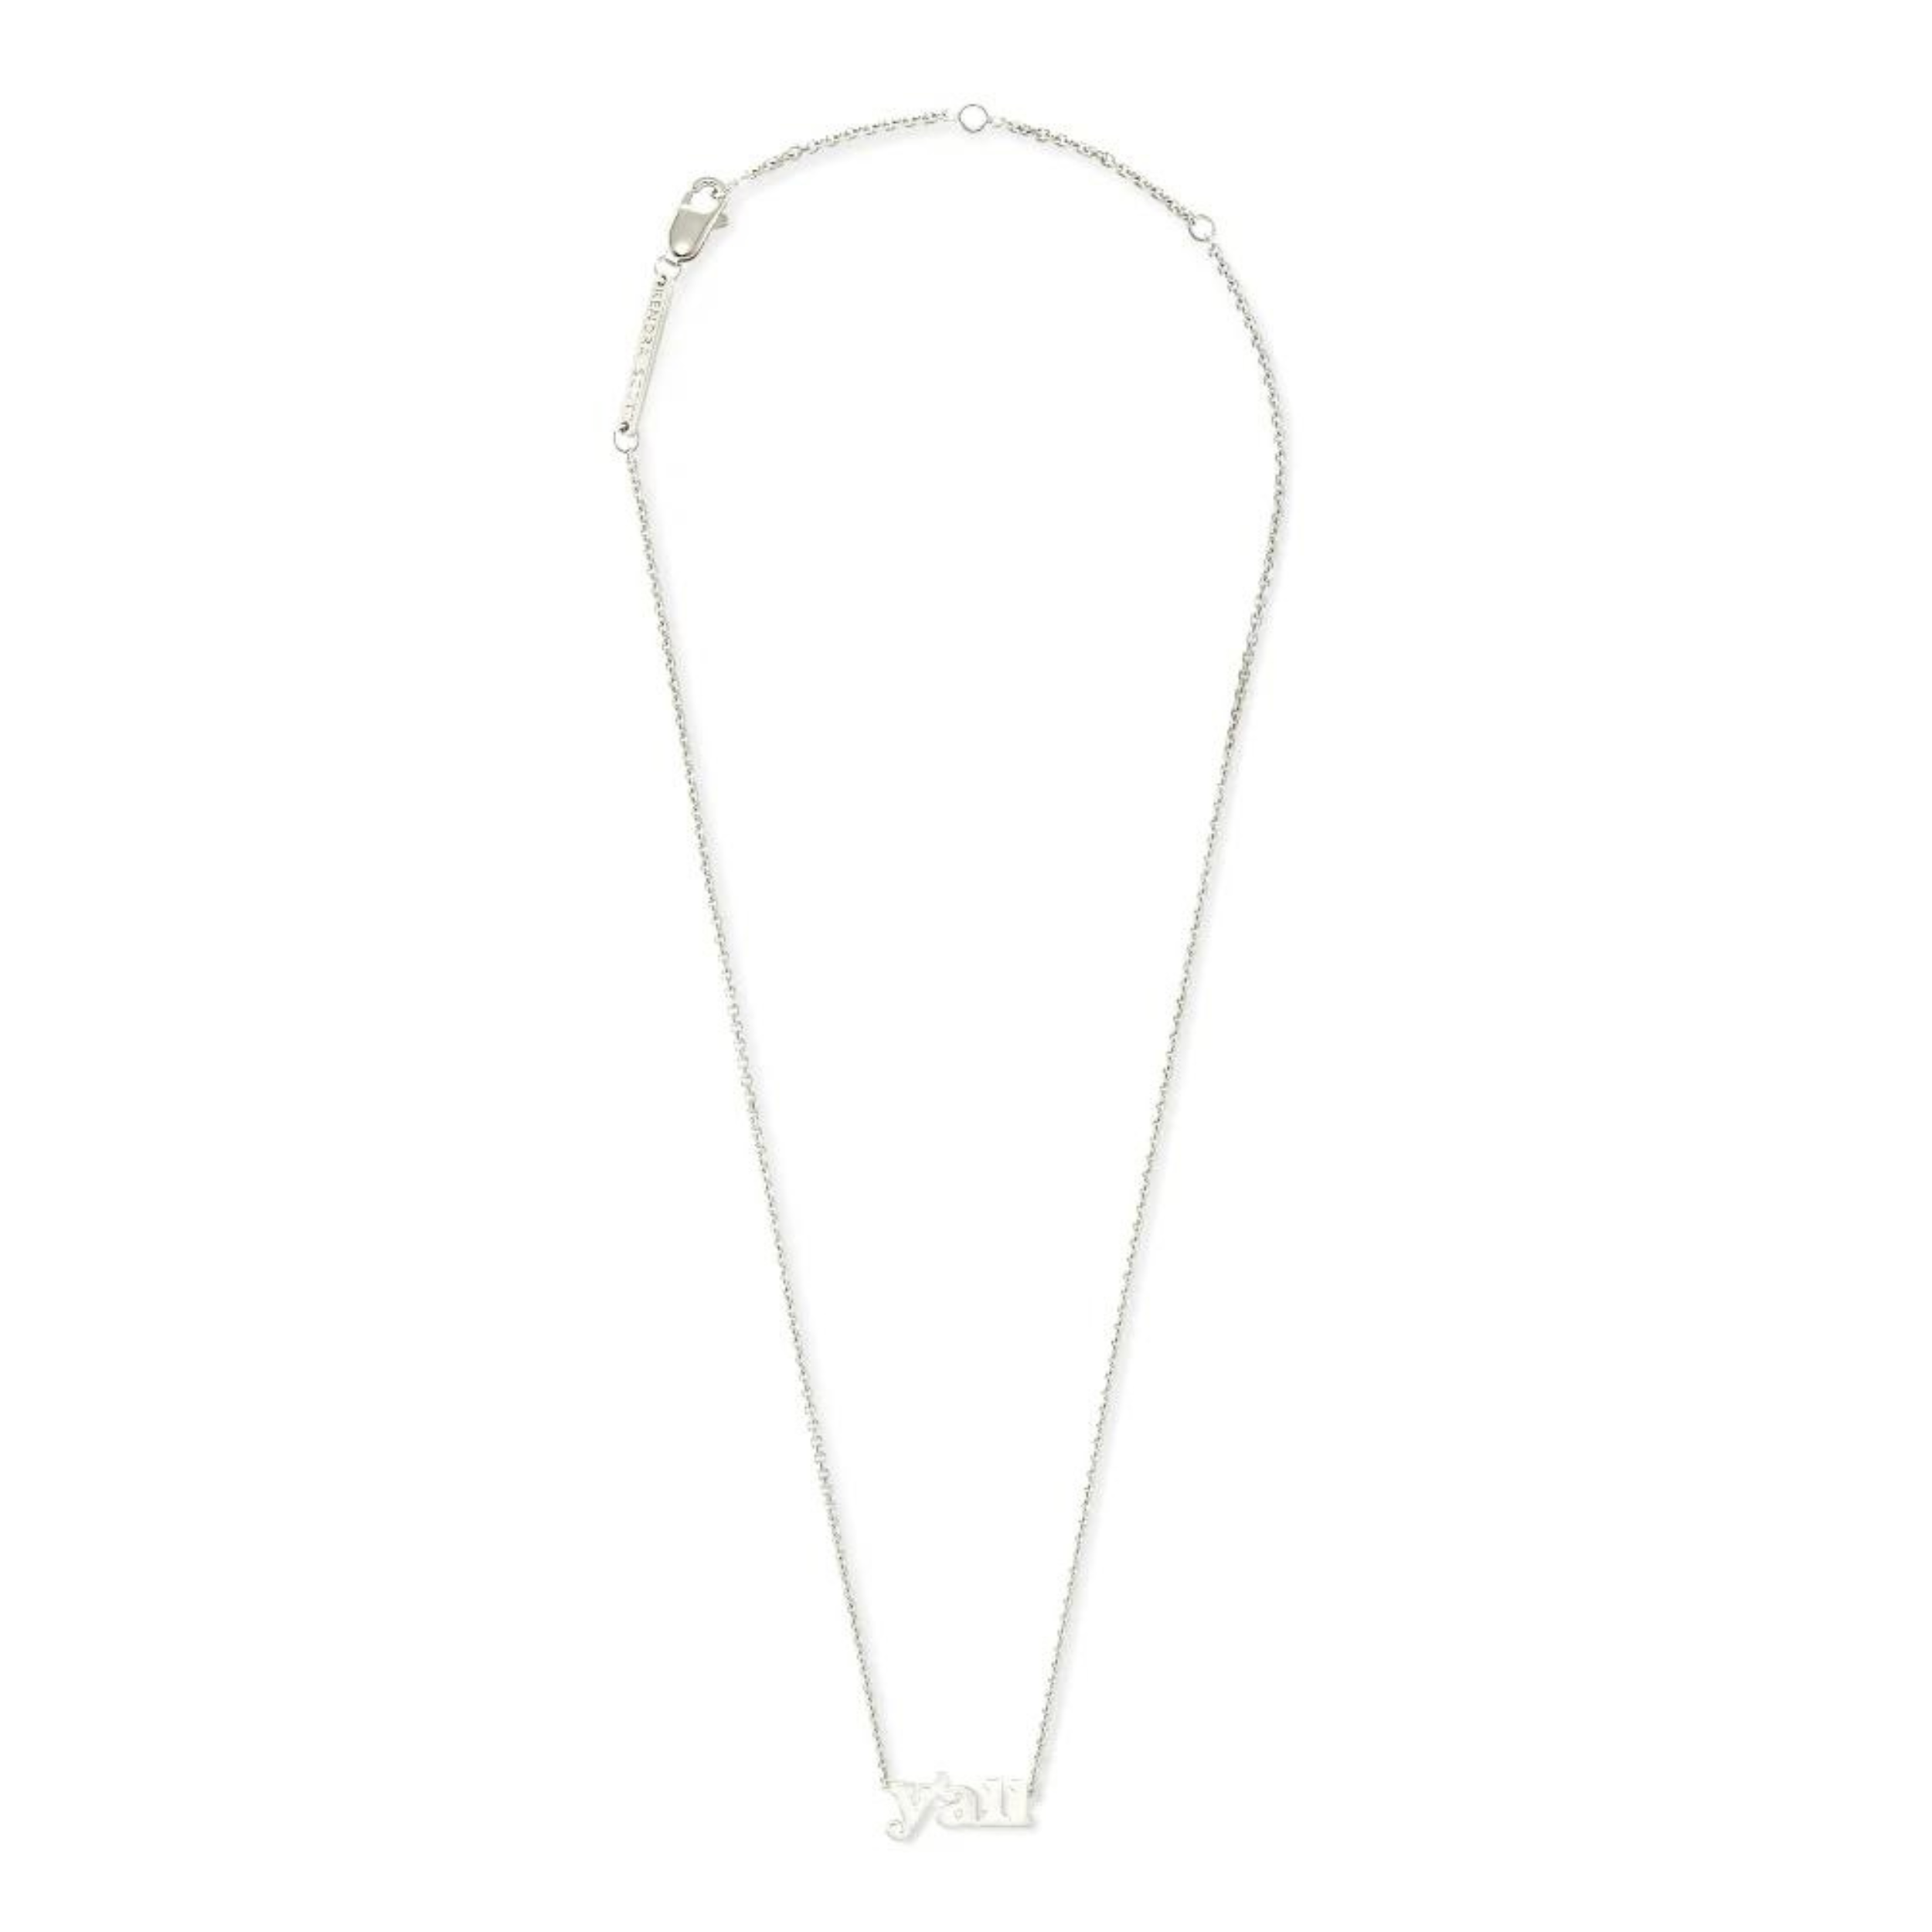 Kendra Scott | Y'all Pendant Necklace in Sterling Silver - Giddy Up Glamour Boutique